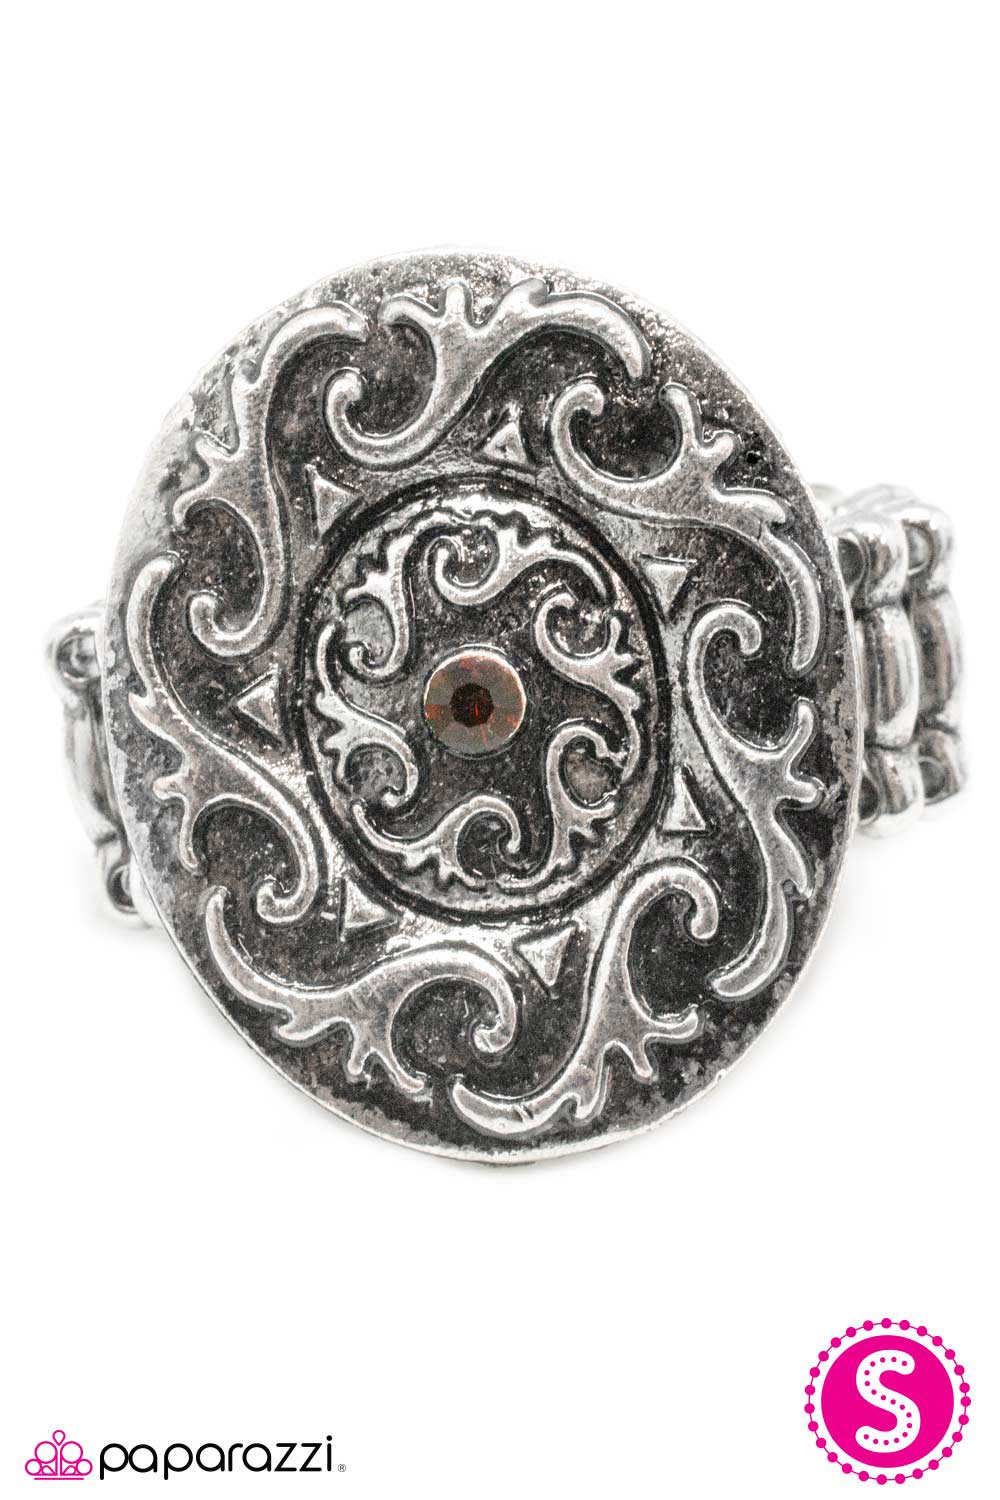 Against The Current Brown and Silver Ring - Paparazzi Accessories-CarasShop.com - $5 Jewelry by Cara Jewels